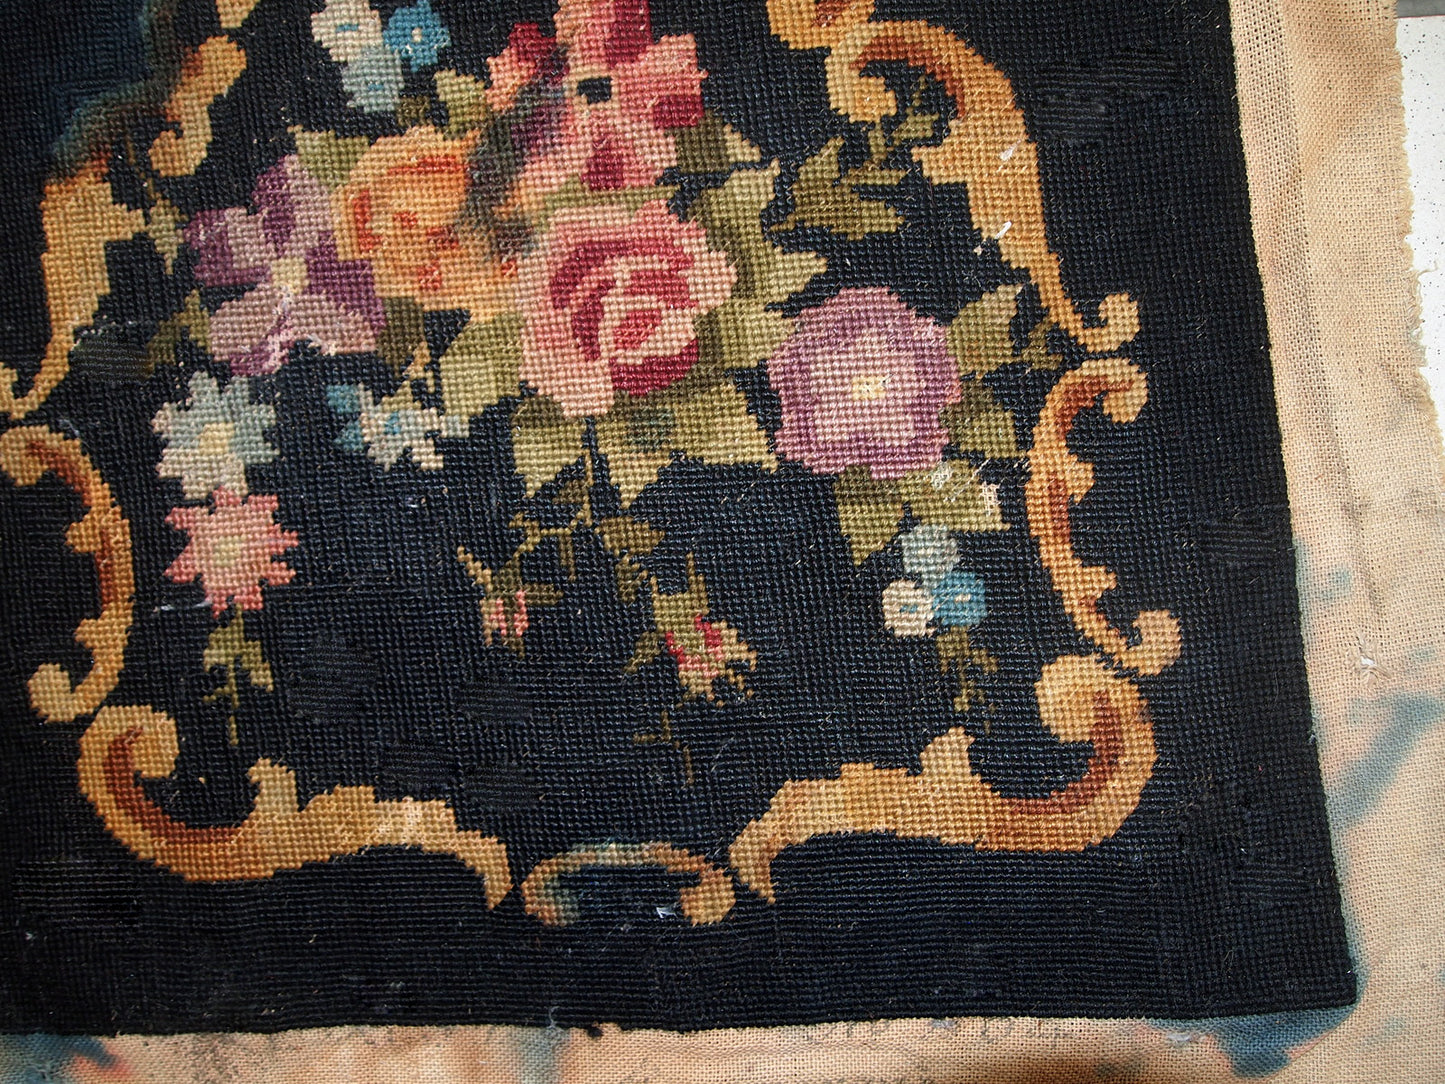 Handmade antique unframed English Needlepoint in black colour with floral design. The size of actual needlepoint is 1.3' x 1.4' (42cm x 45cm) and with the sides is 2' x 2.2' (63cm x 68cm). It is in original condition, it has some discolourations on the side areas. It can be framed or attached to a decorative pillow, chair etc.